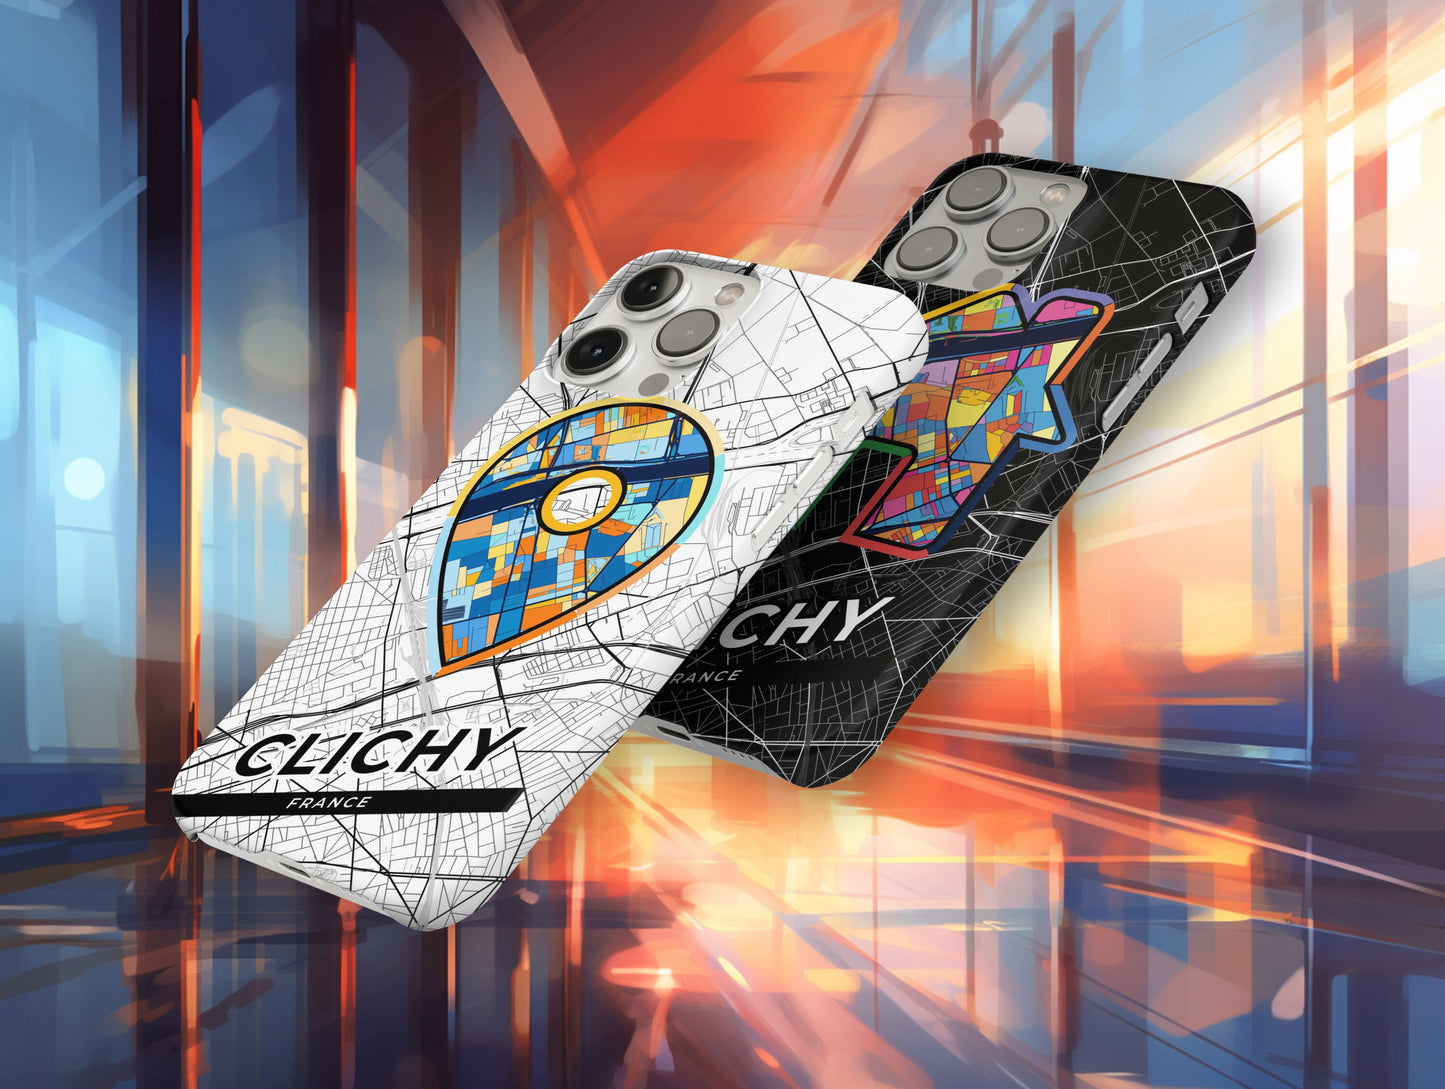 Clichy France slim phone case with colorful icon. Birthday, wedding or housewarming gift. Couple match cases.